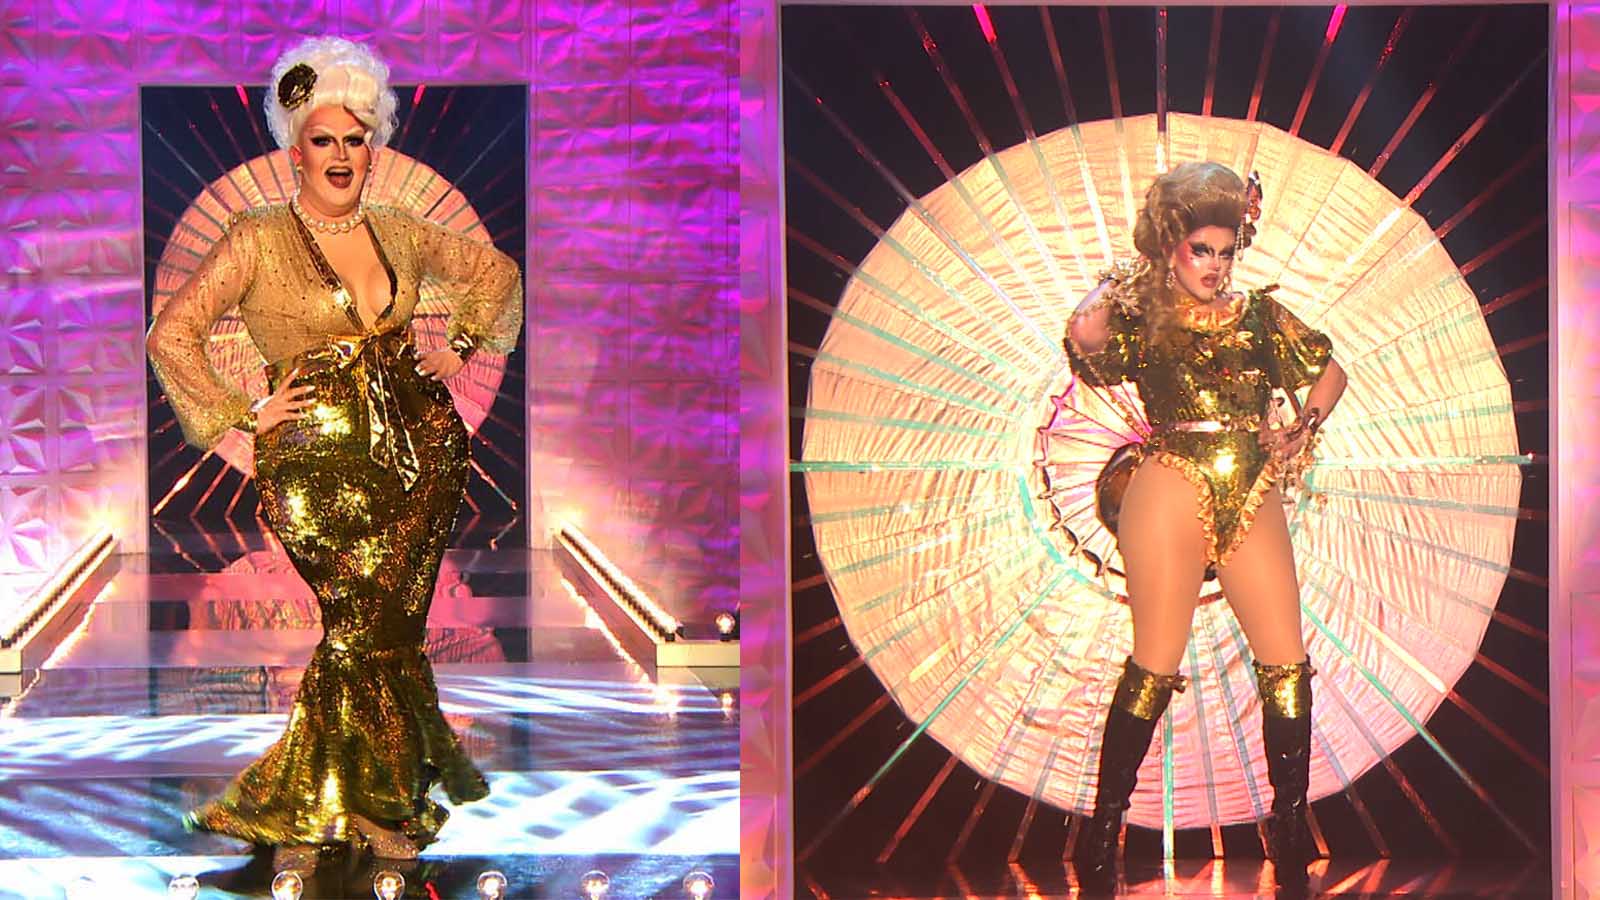 The dreaded design challenge has come to 'Drag Race UK' with an ugly twist. Let us recap the lewks and see which queen *truly* wore it better.